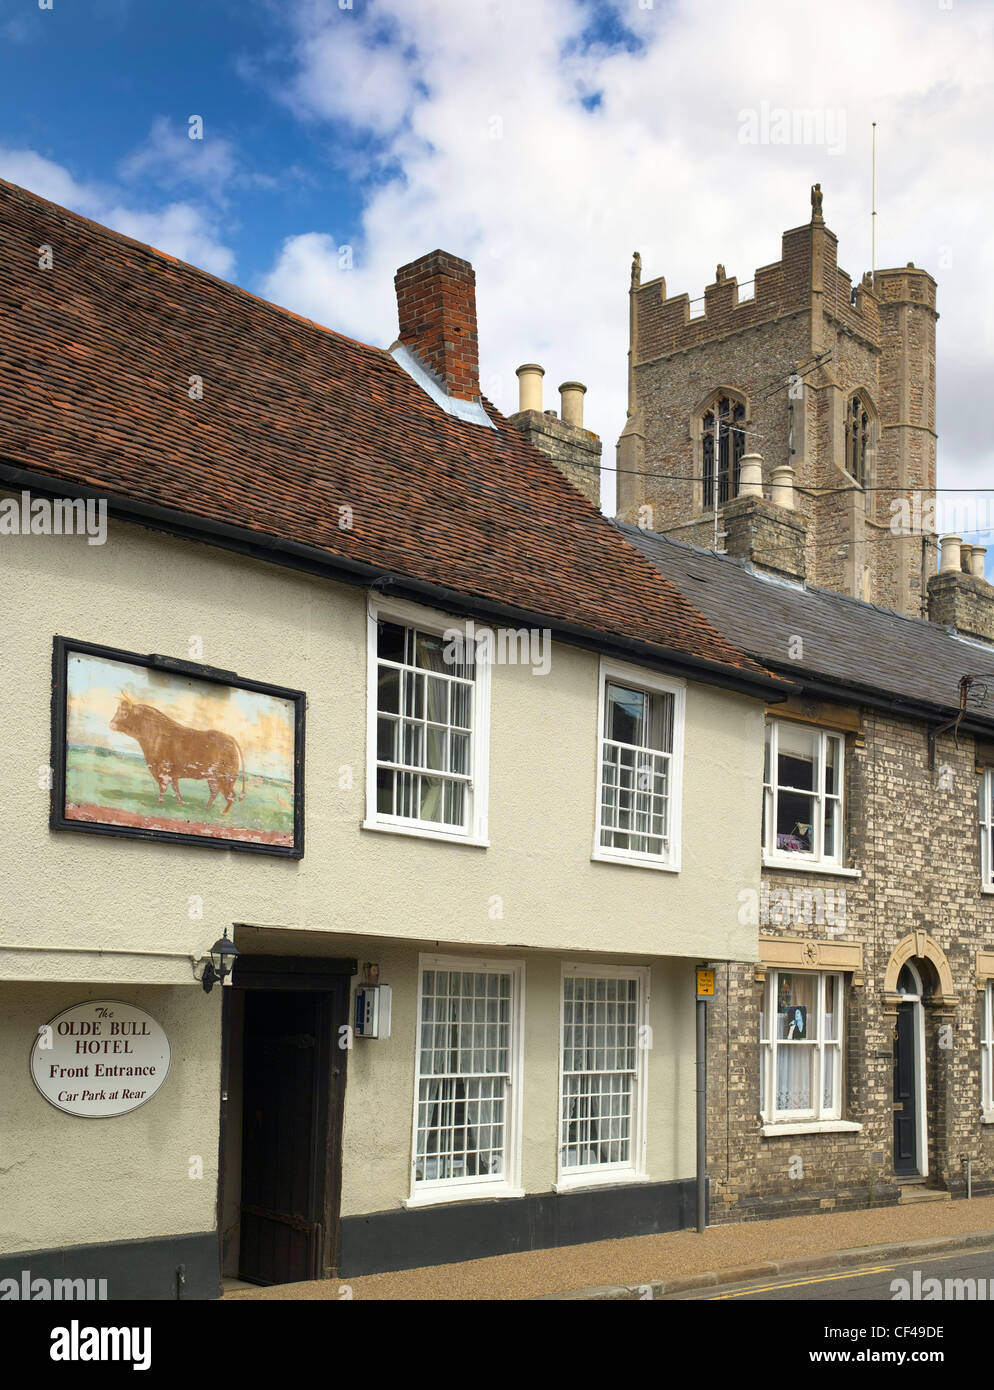 The Olde Bull Hotel in a 16th century Grade l listed old coaching inn overlooked by the church of St Peter in the centre of the Stock Photo